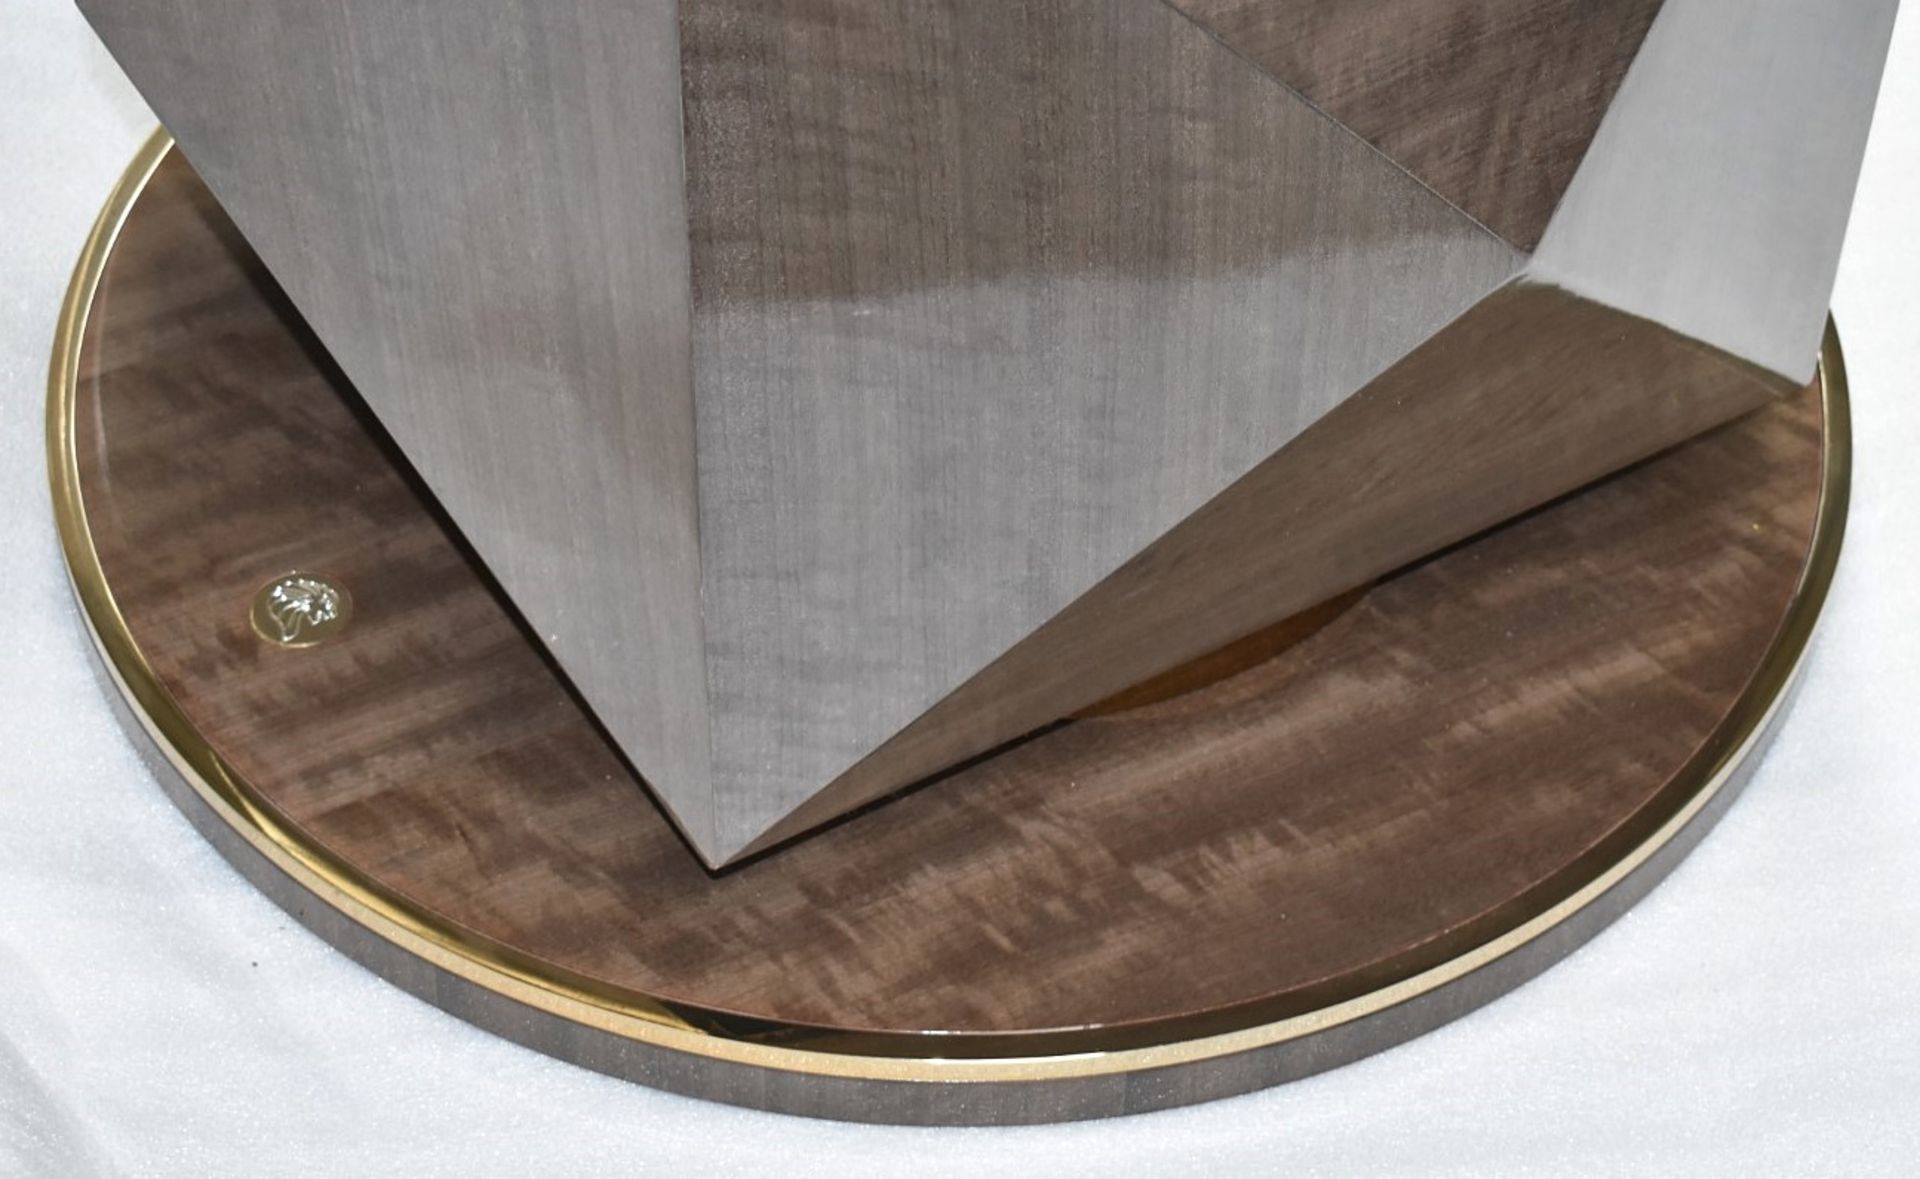 1 x GIORGIO COLLECTION 'Infinity' Exisite Luxury Round Wooden Table Base - Image 4 of 5